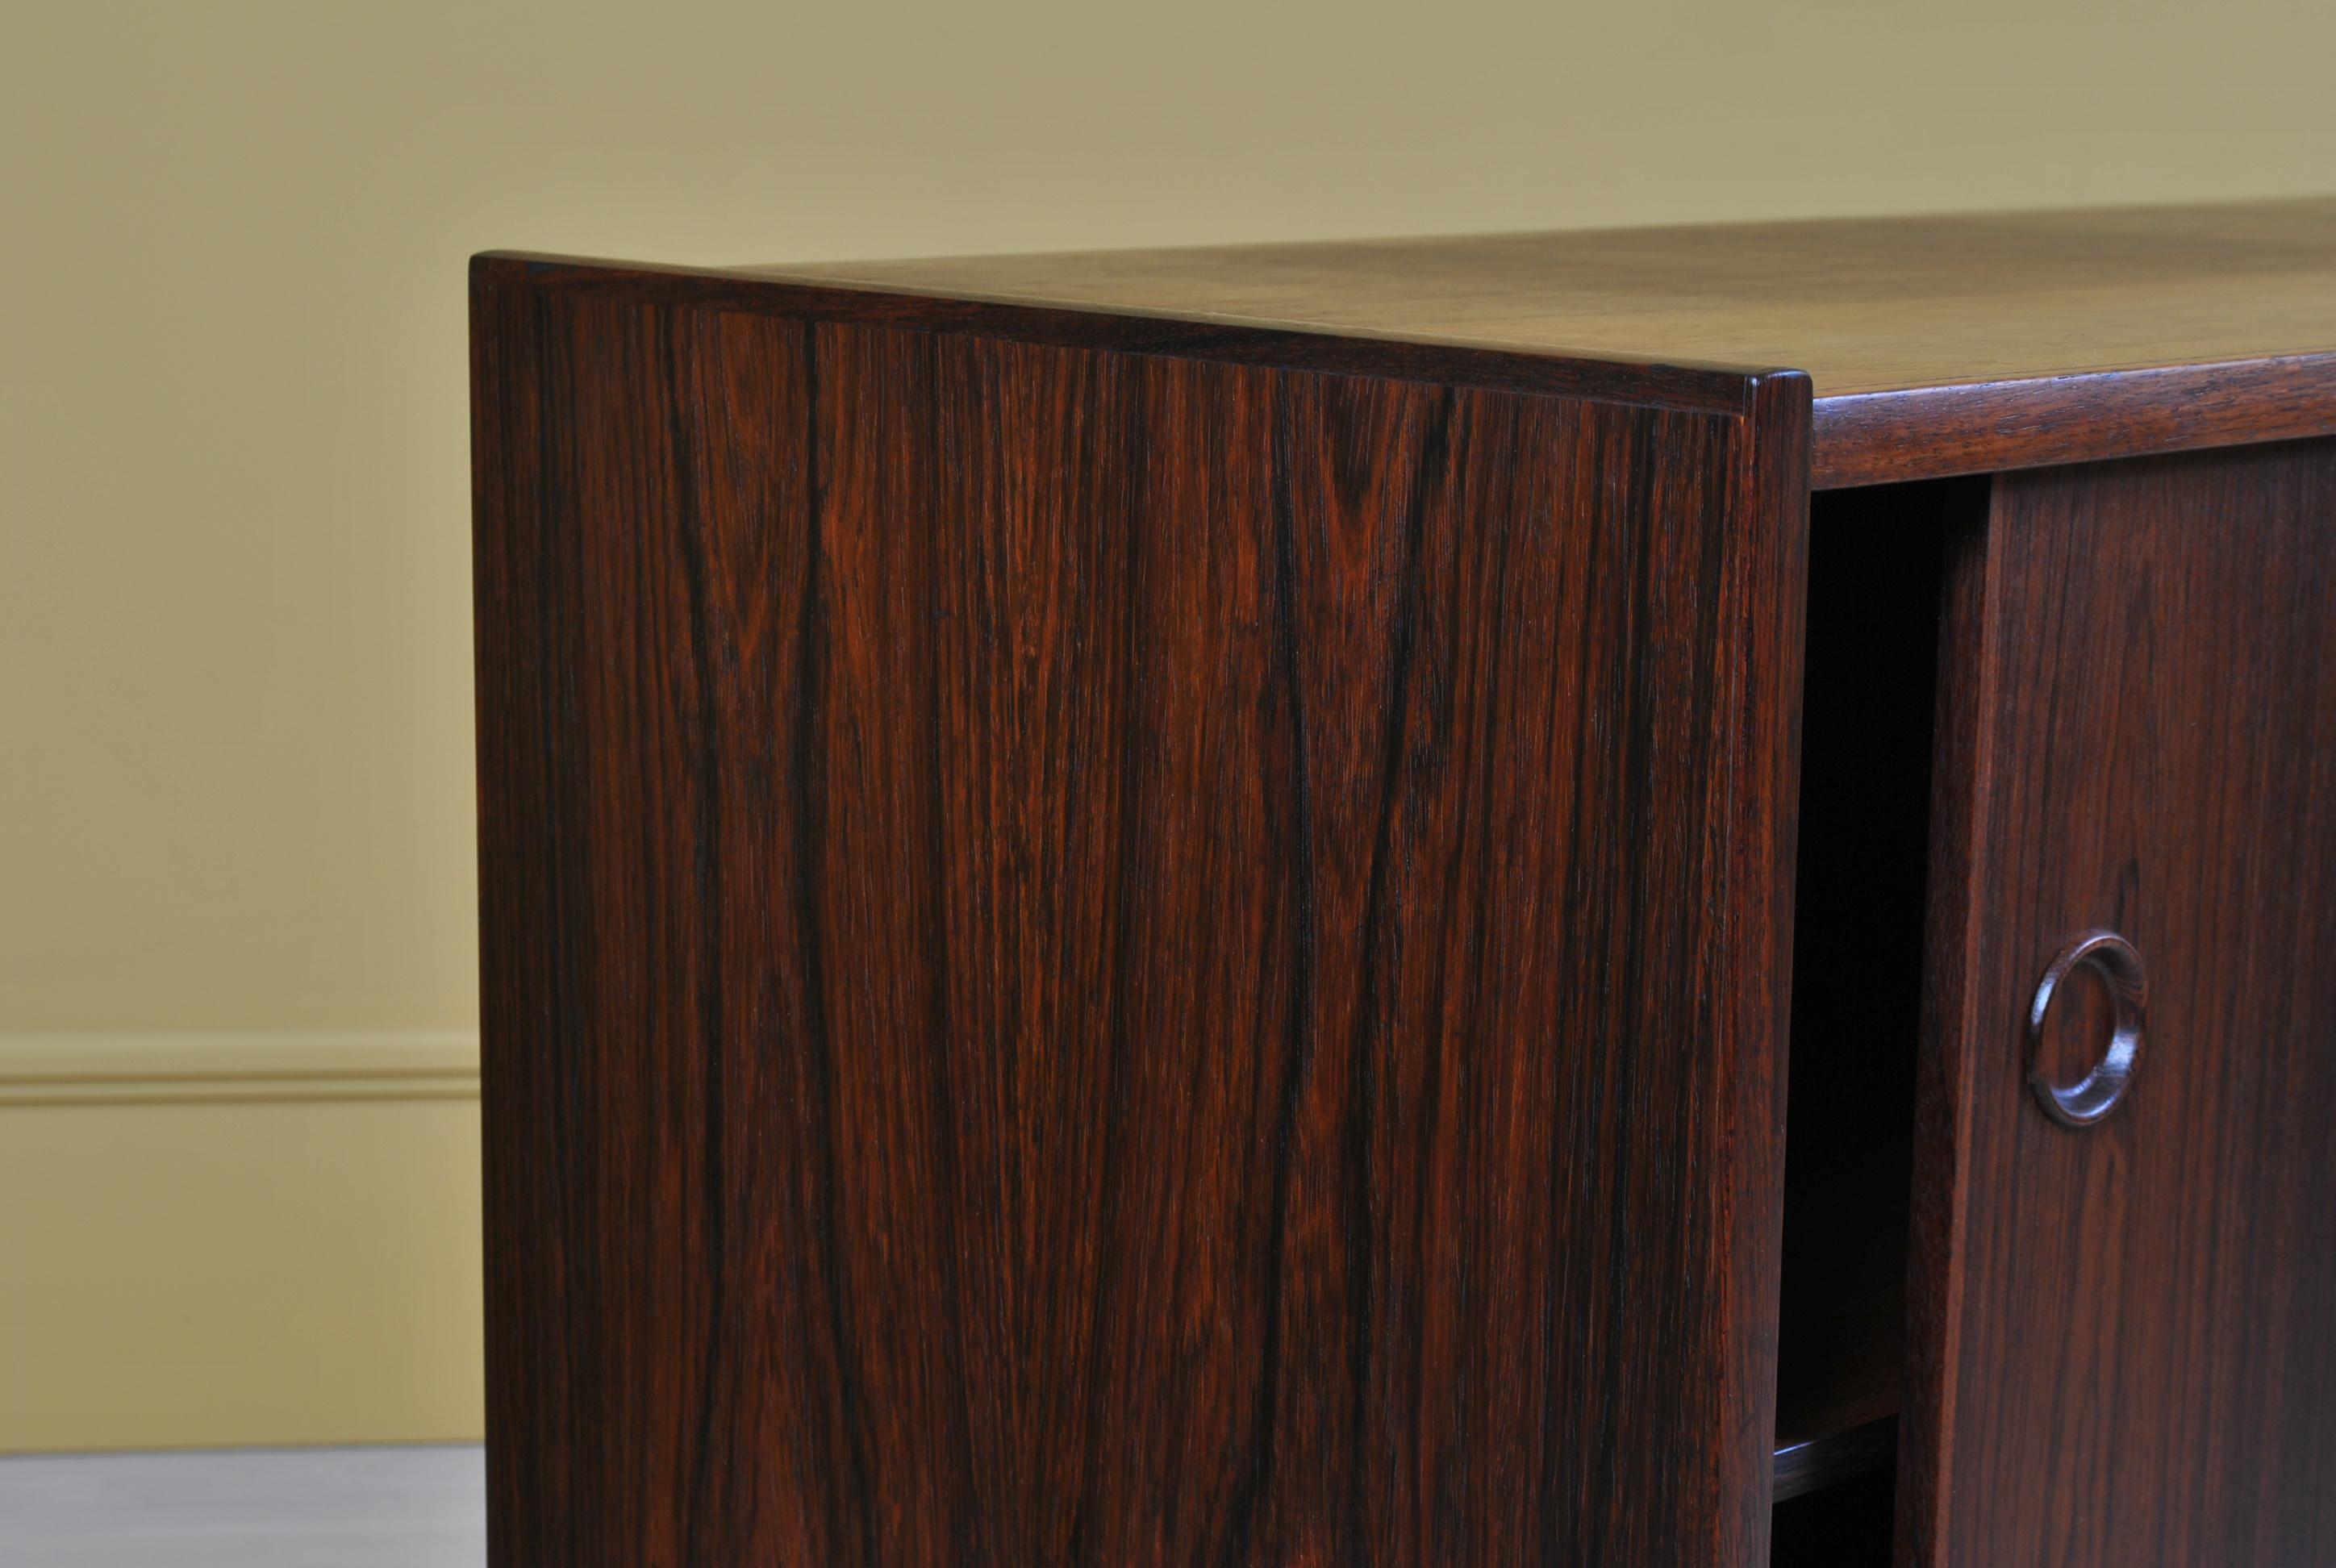 A Danish midcentury rosewood credenza or sideboard. Double sliding doors with internal shelf and 2 small maple drawers.